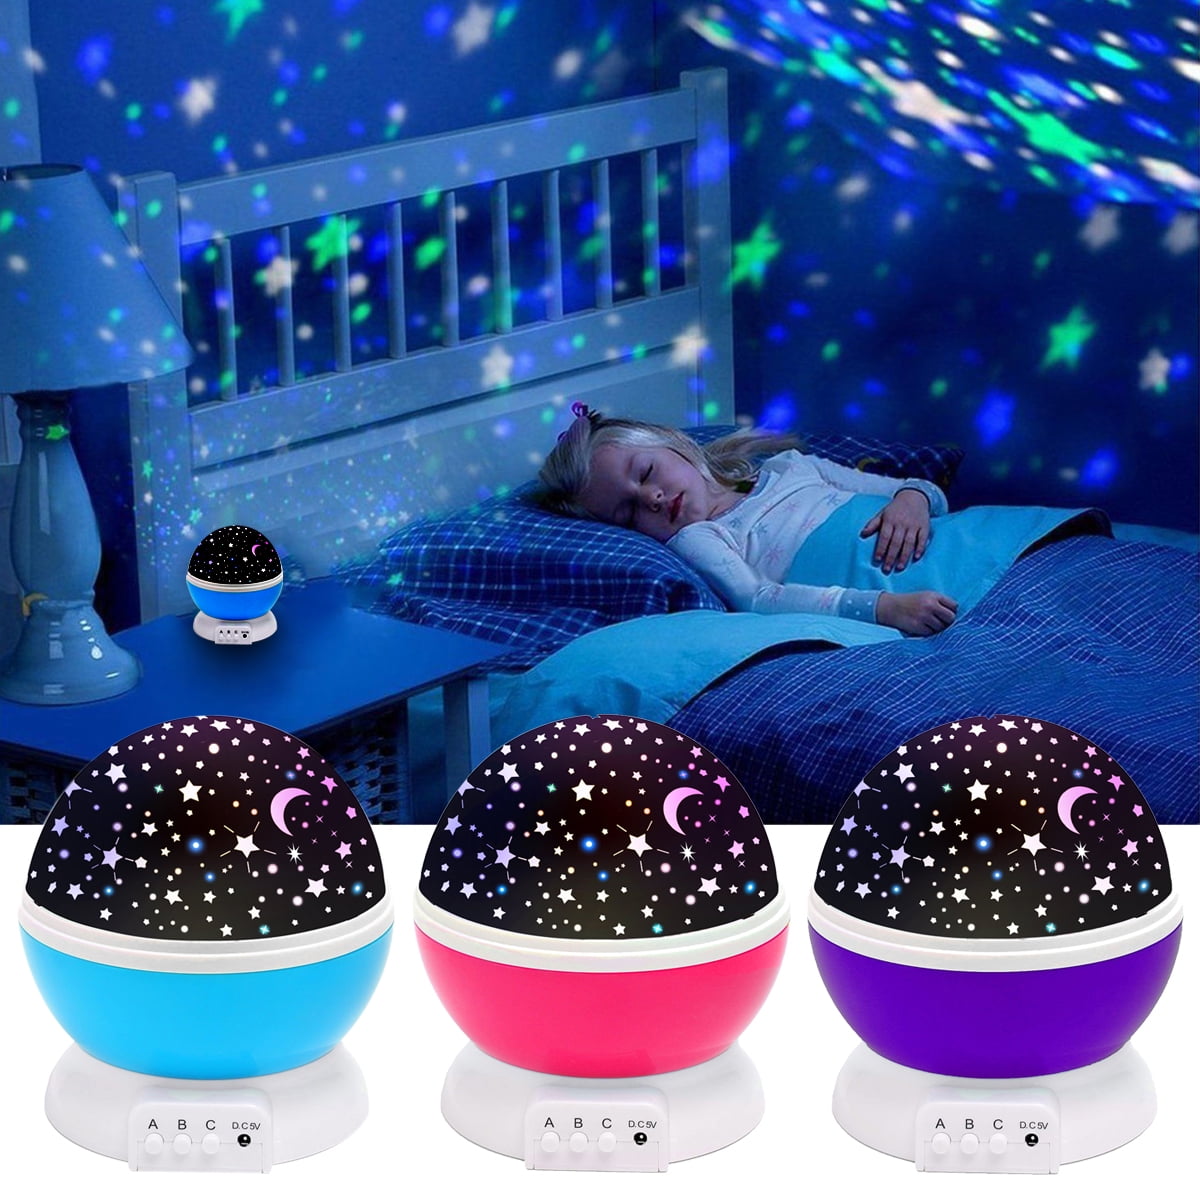 Romantic LED Cosmos Star Master Sky Starry Night Projector Bed Light Lamp Gi!oBW 